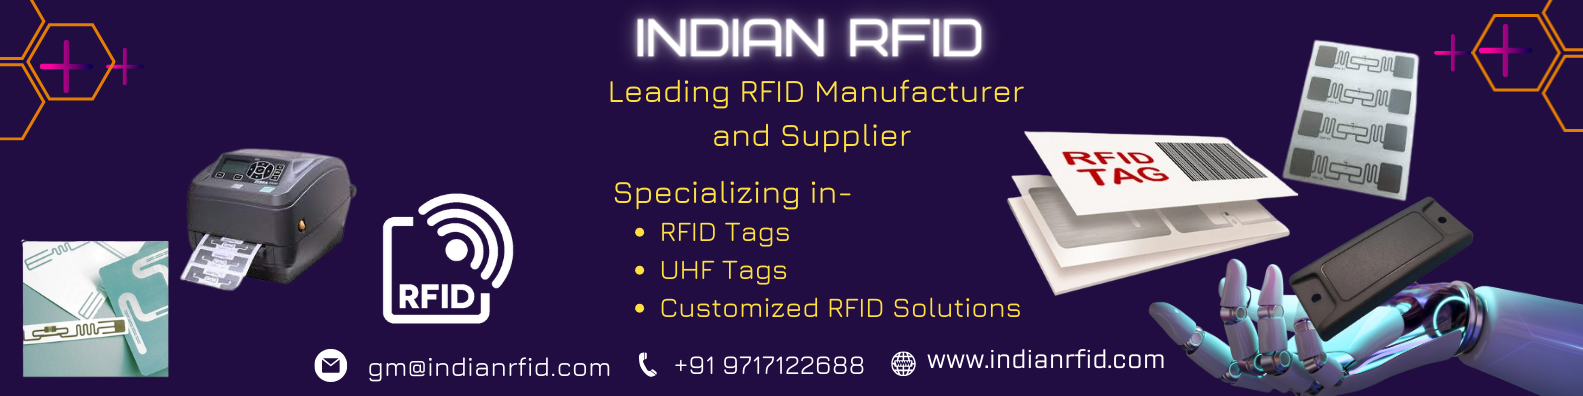 Leading RFID Manufacturer and Supplier